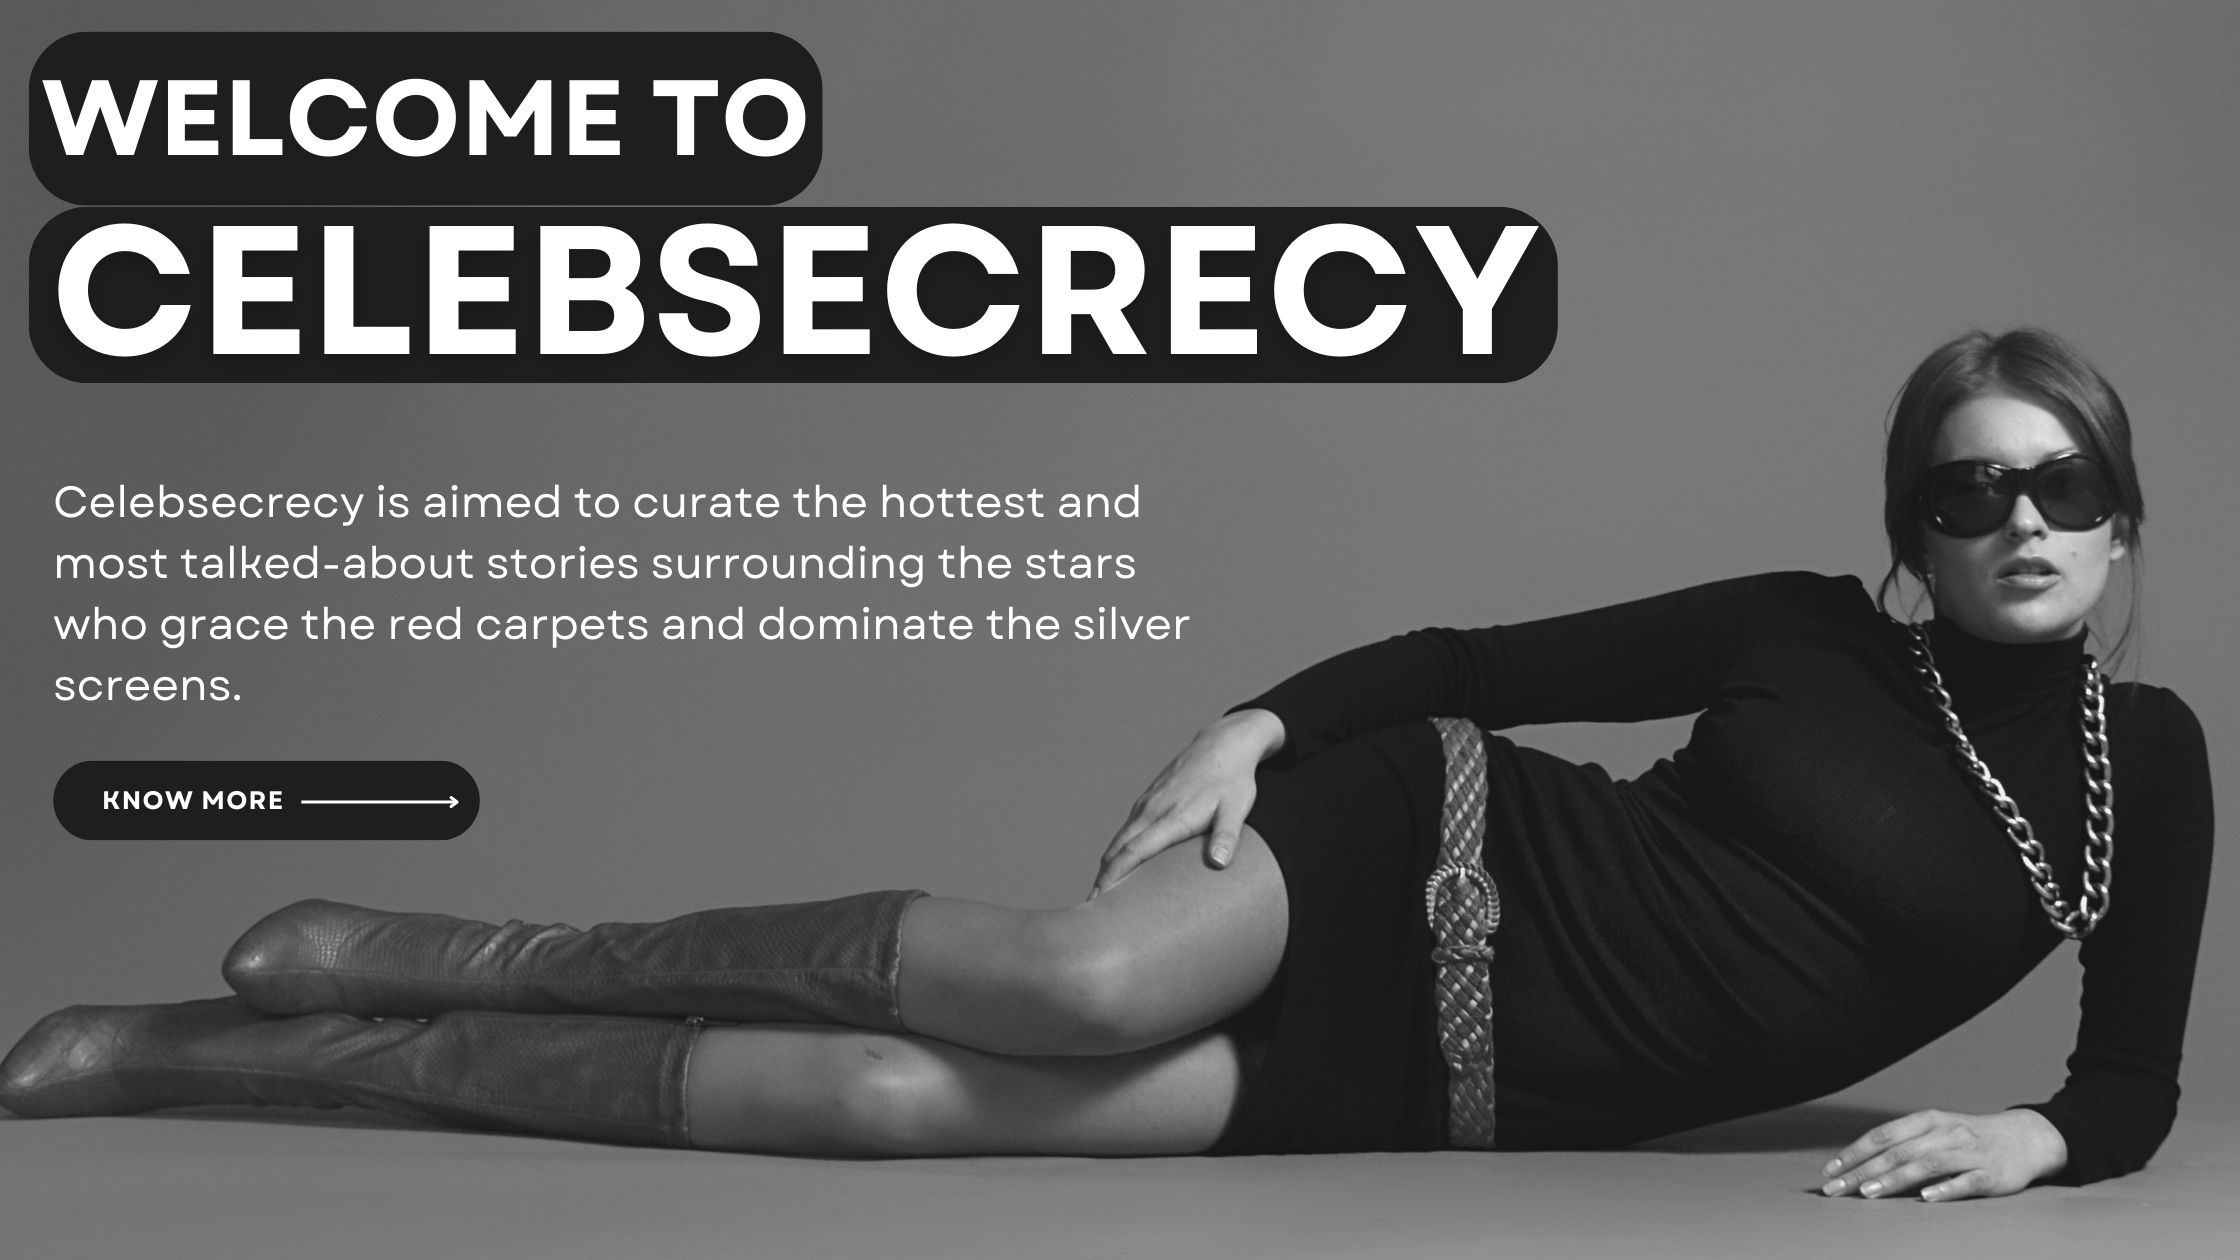 Welcome to Celebsecrecy